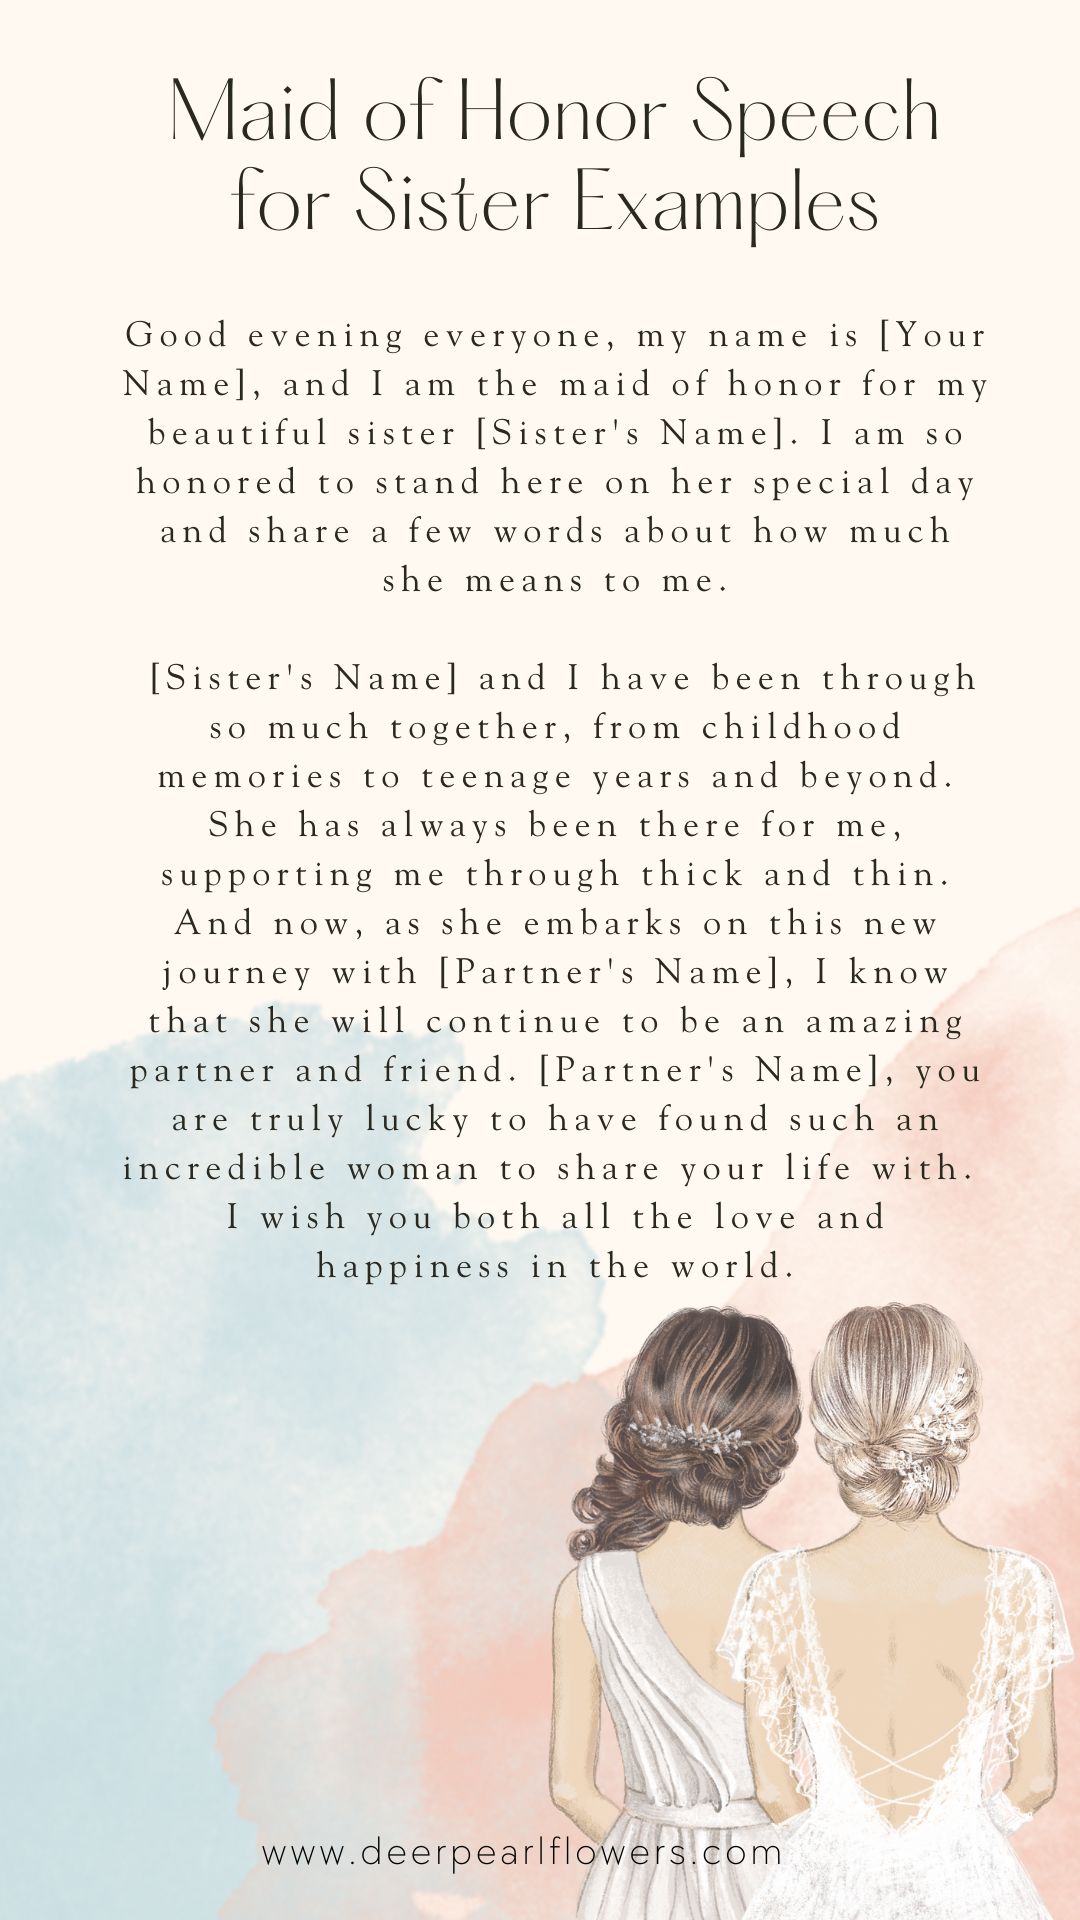 maid of honor speech examples older sister